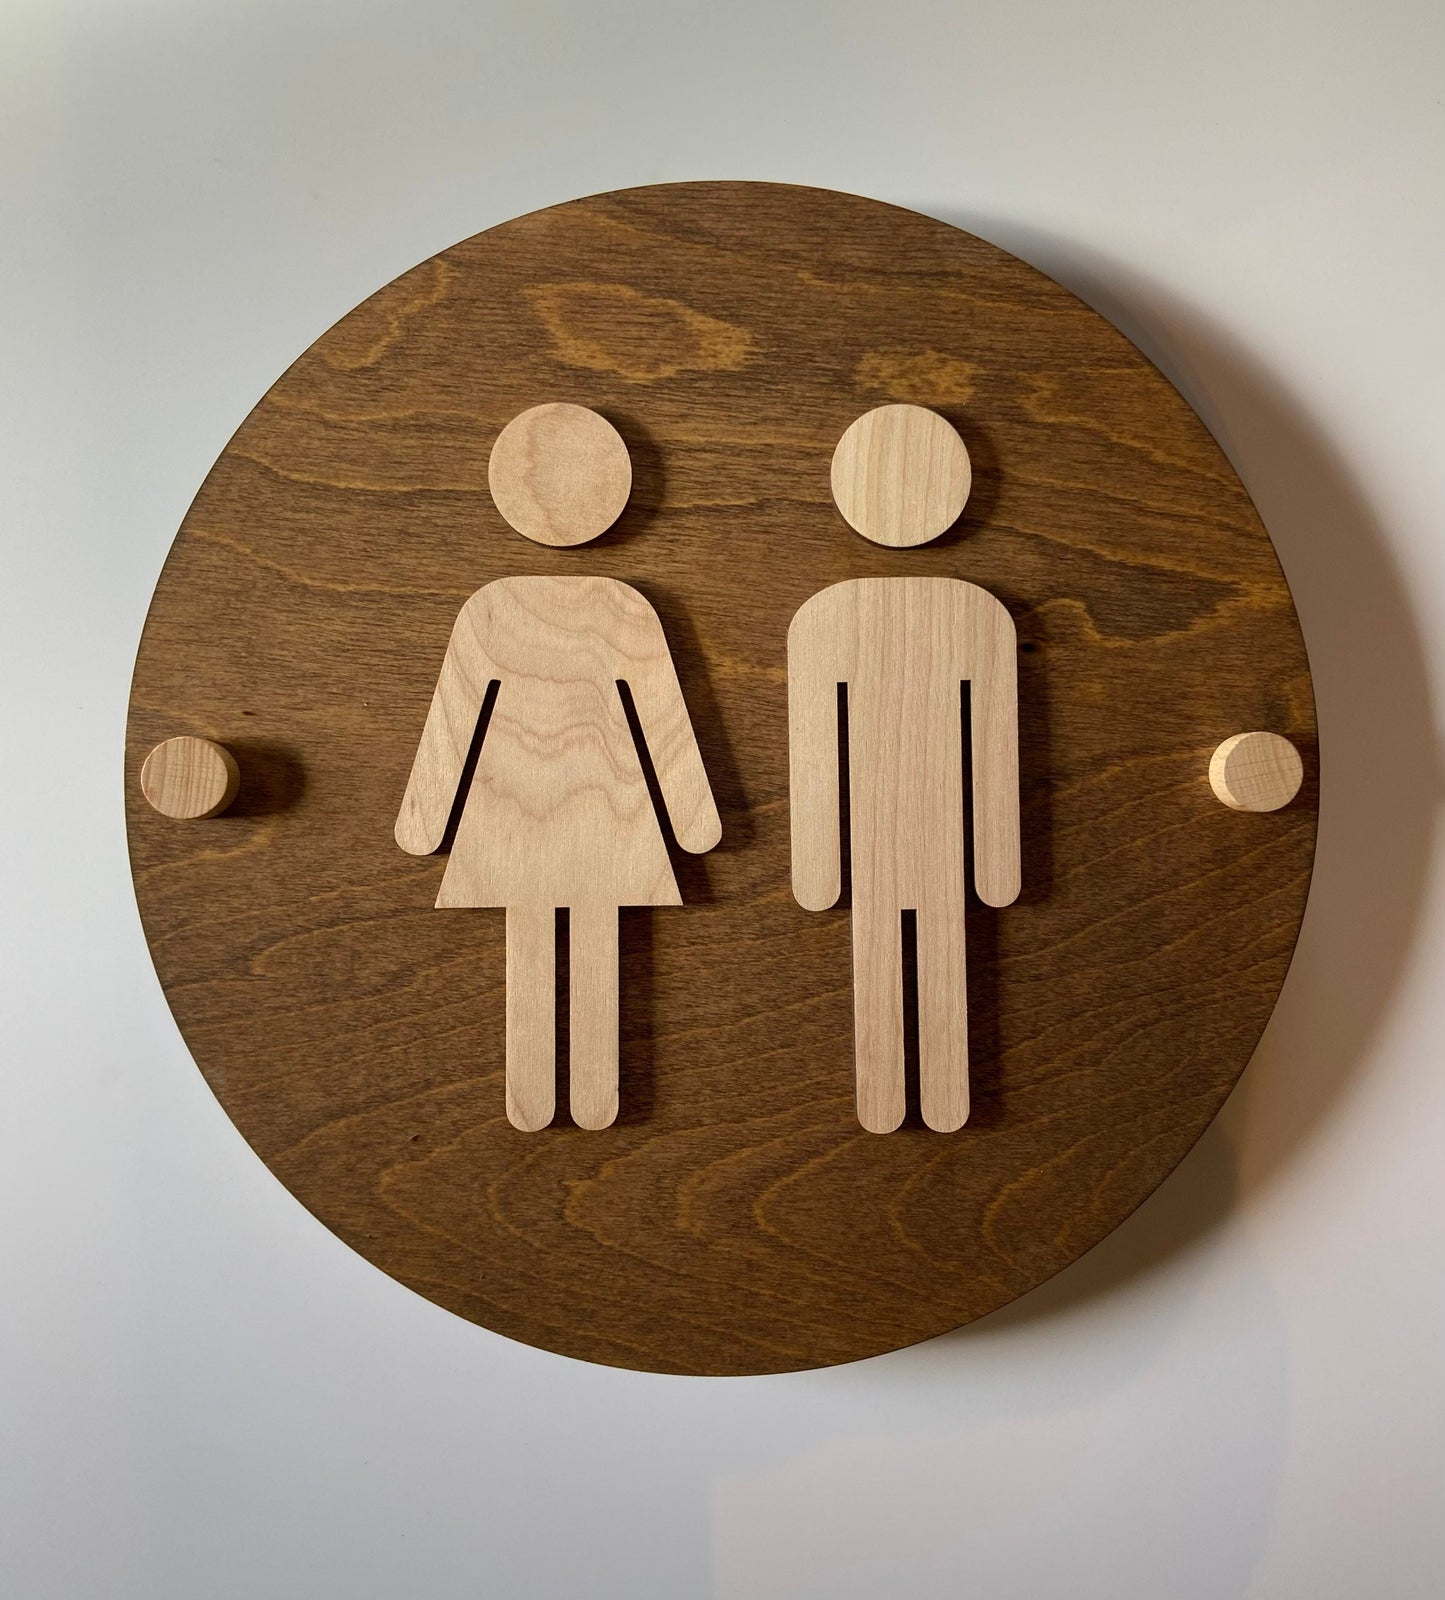 Bathroom Sign 12” with matching Wood Hardware | Office Store Restroom Directional | Priced per sign not as a set